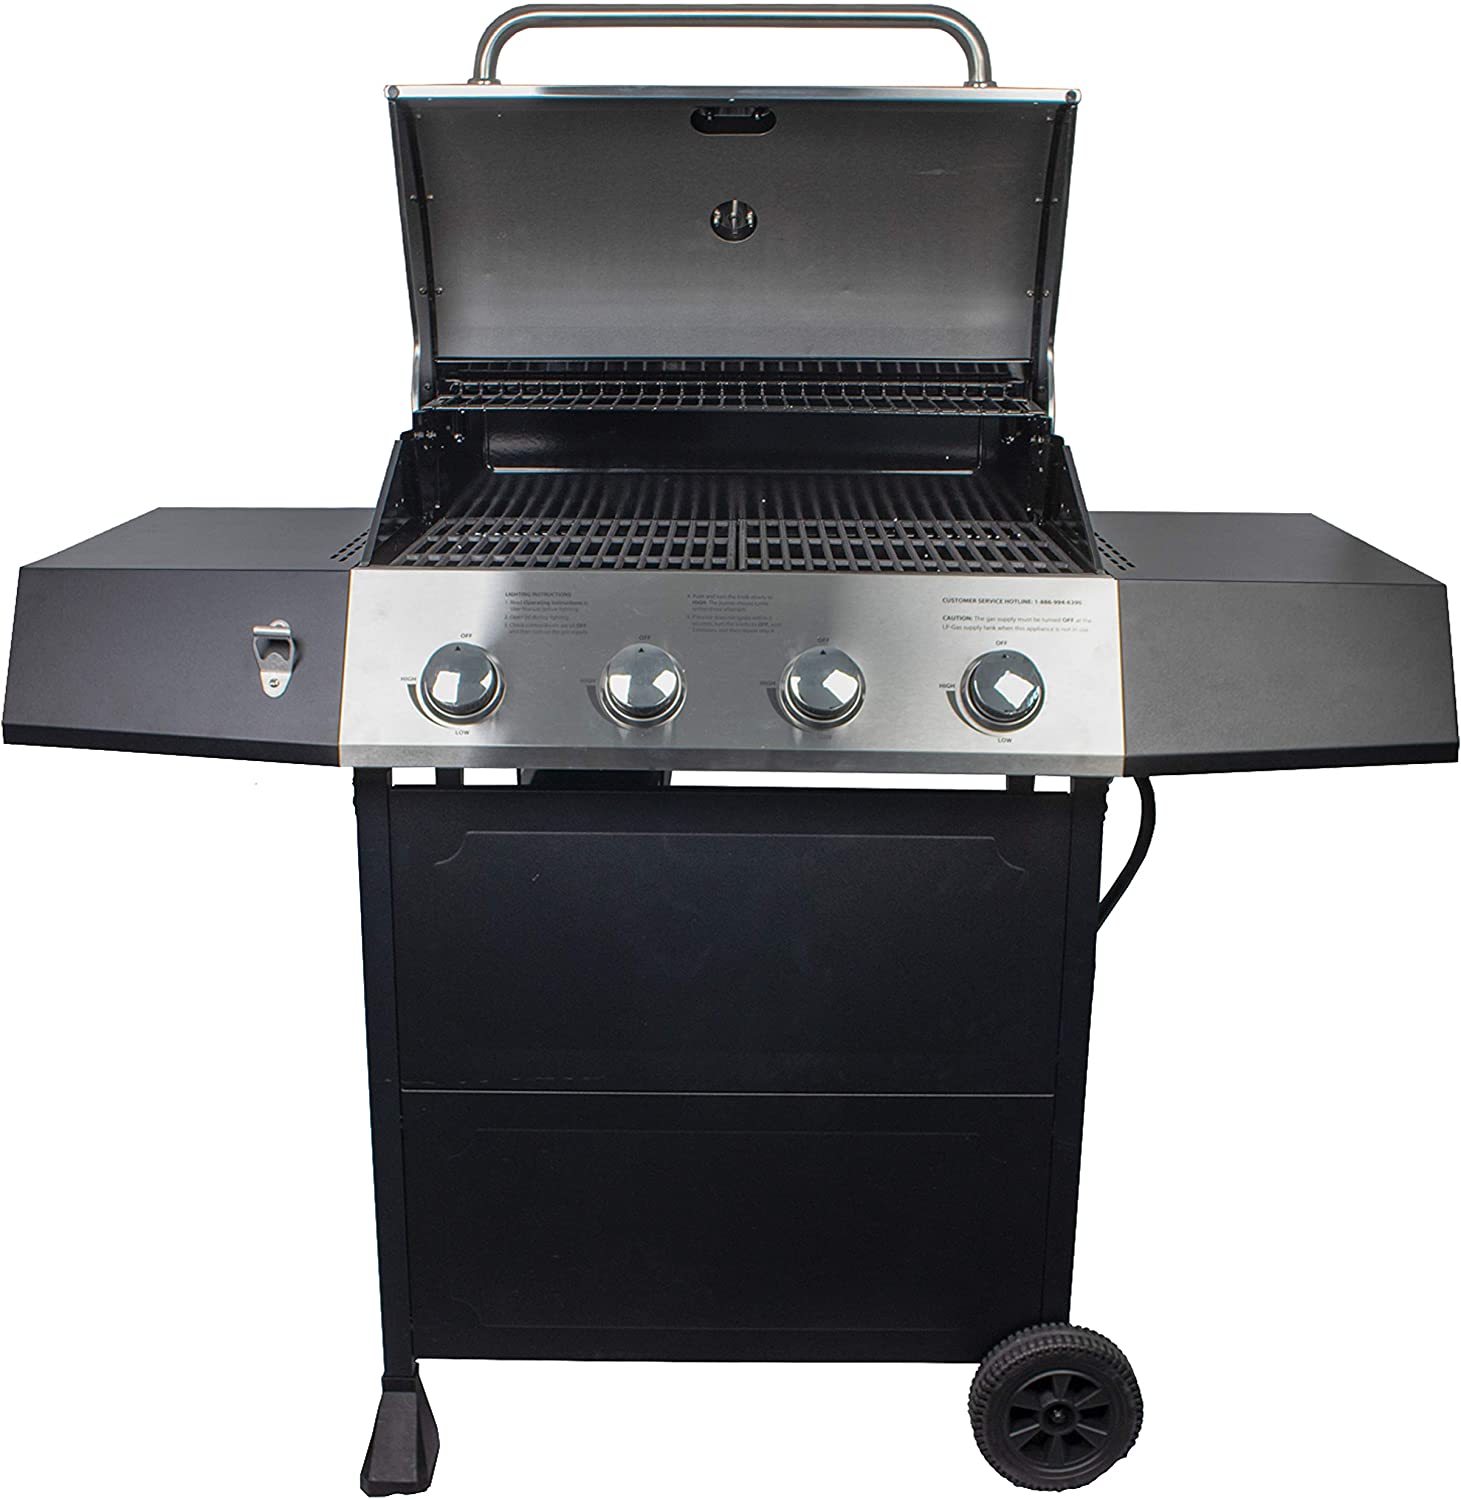 Top 10 Best Gas Grill Under 300 Buying Guide Review 2020 Tik Tok Tips